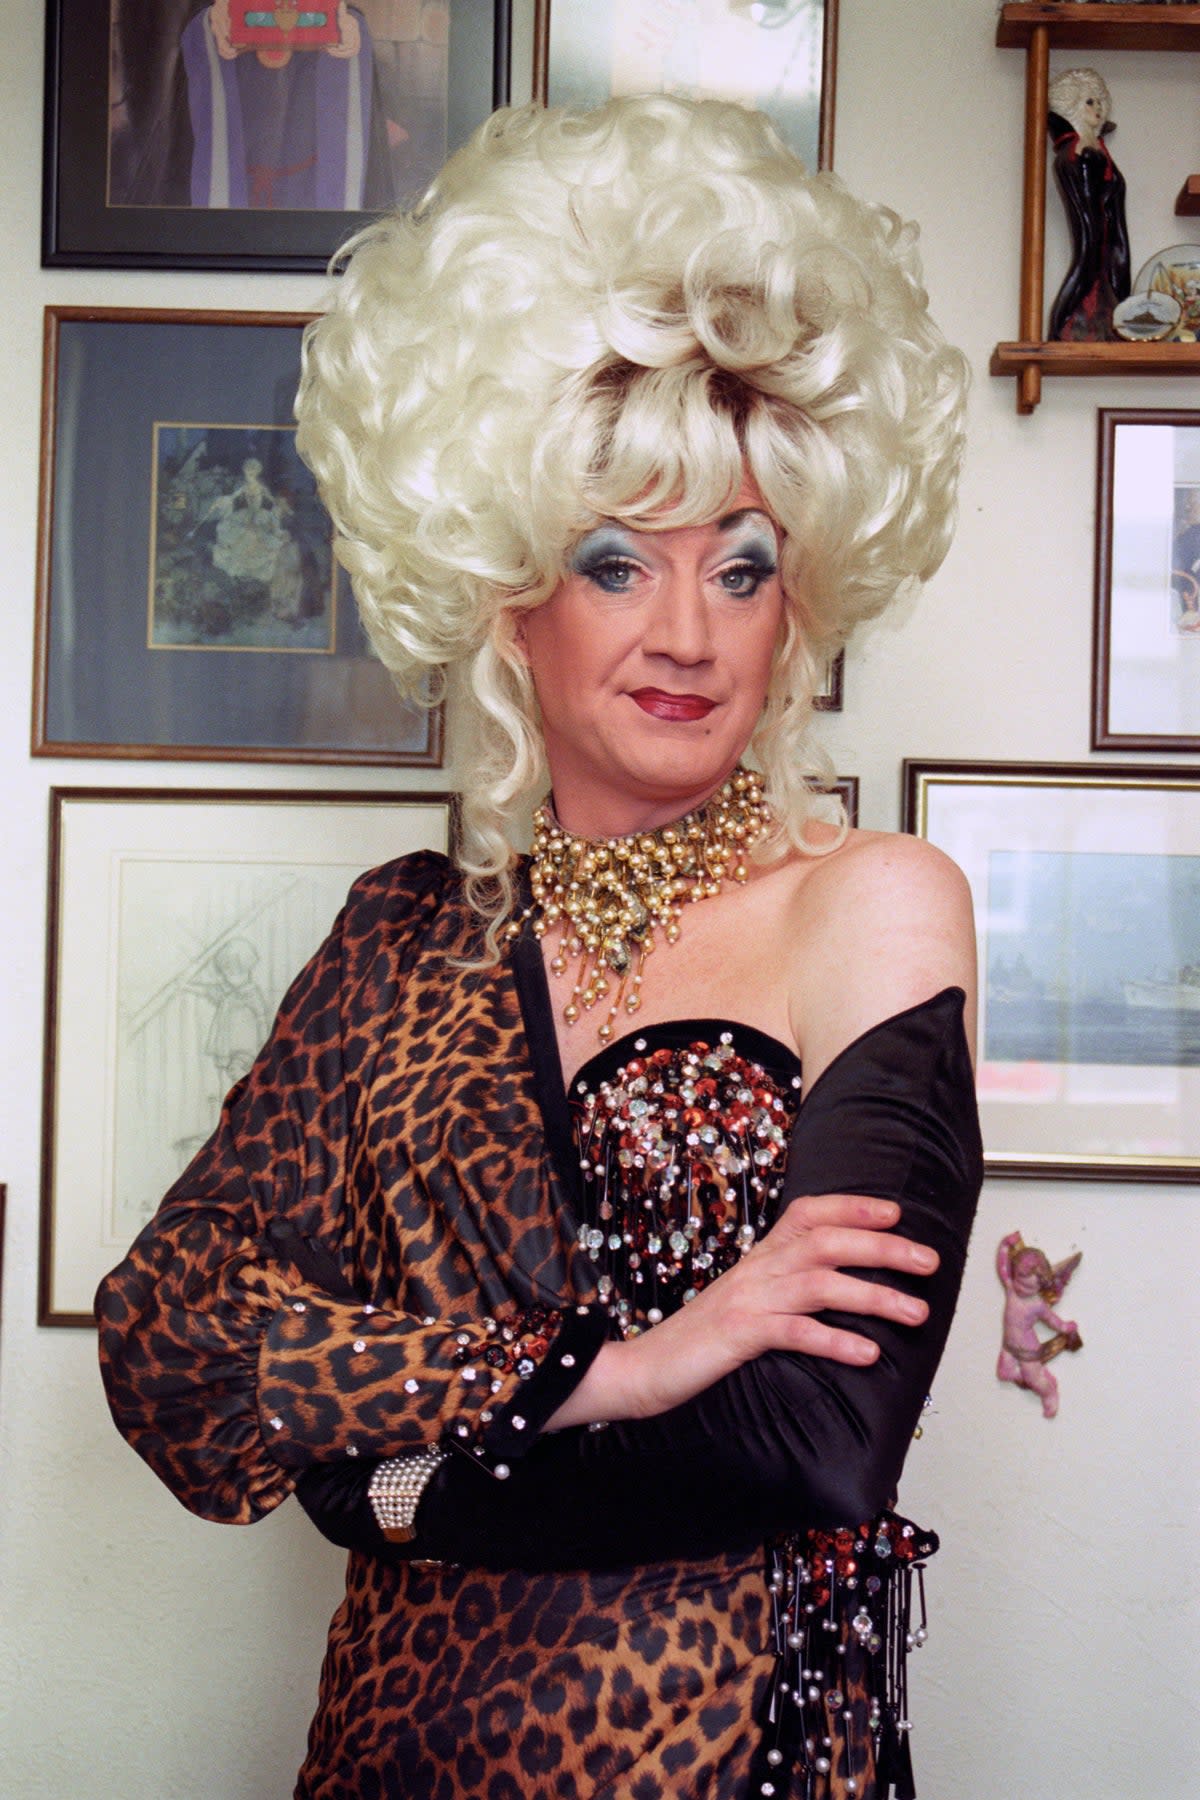 Alter ego: O’Grady in character as Lily Savage, complete with trademark blonde wig (PA)